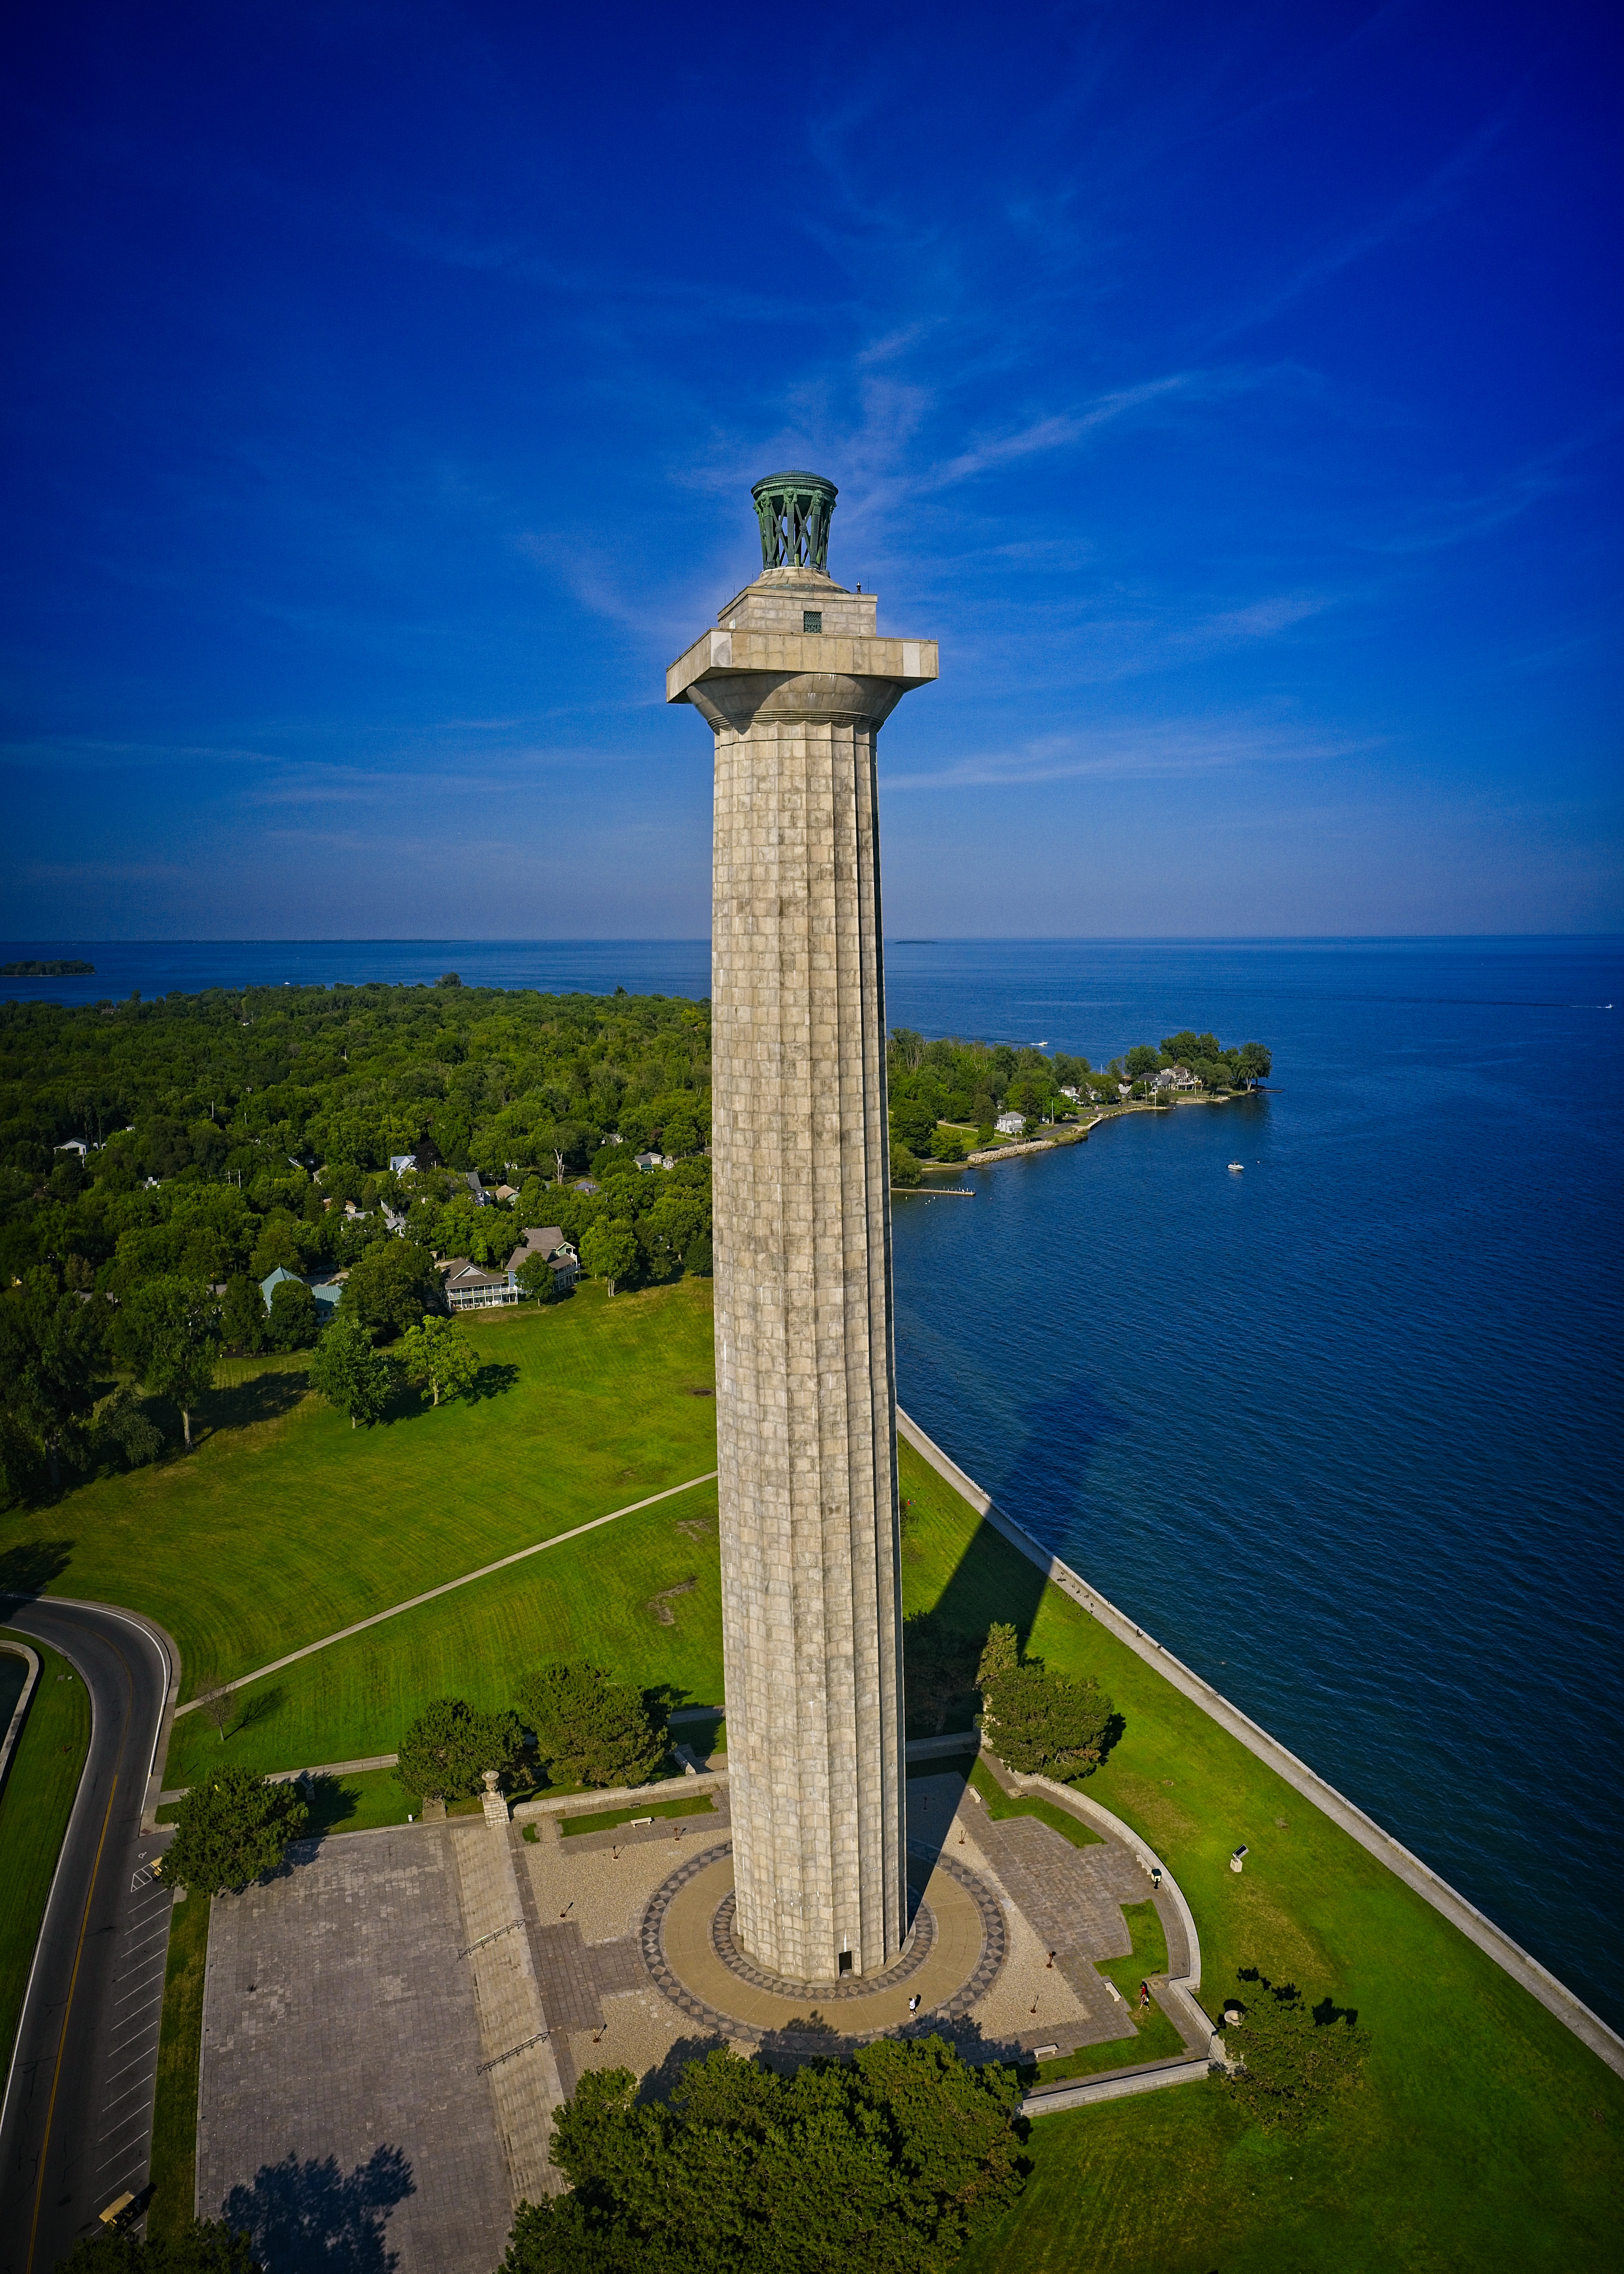 Aerial image of a tall stone memorial with two plazas at base on an isthmus of an island. Surrounded by green grass. Blue sky and water in the distance.